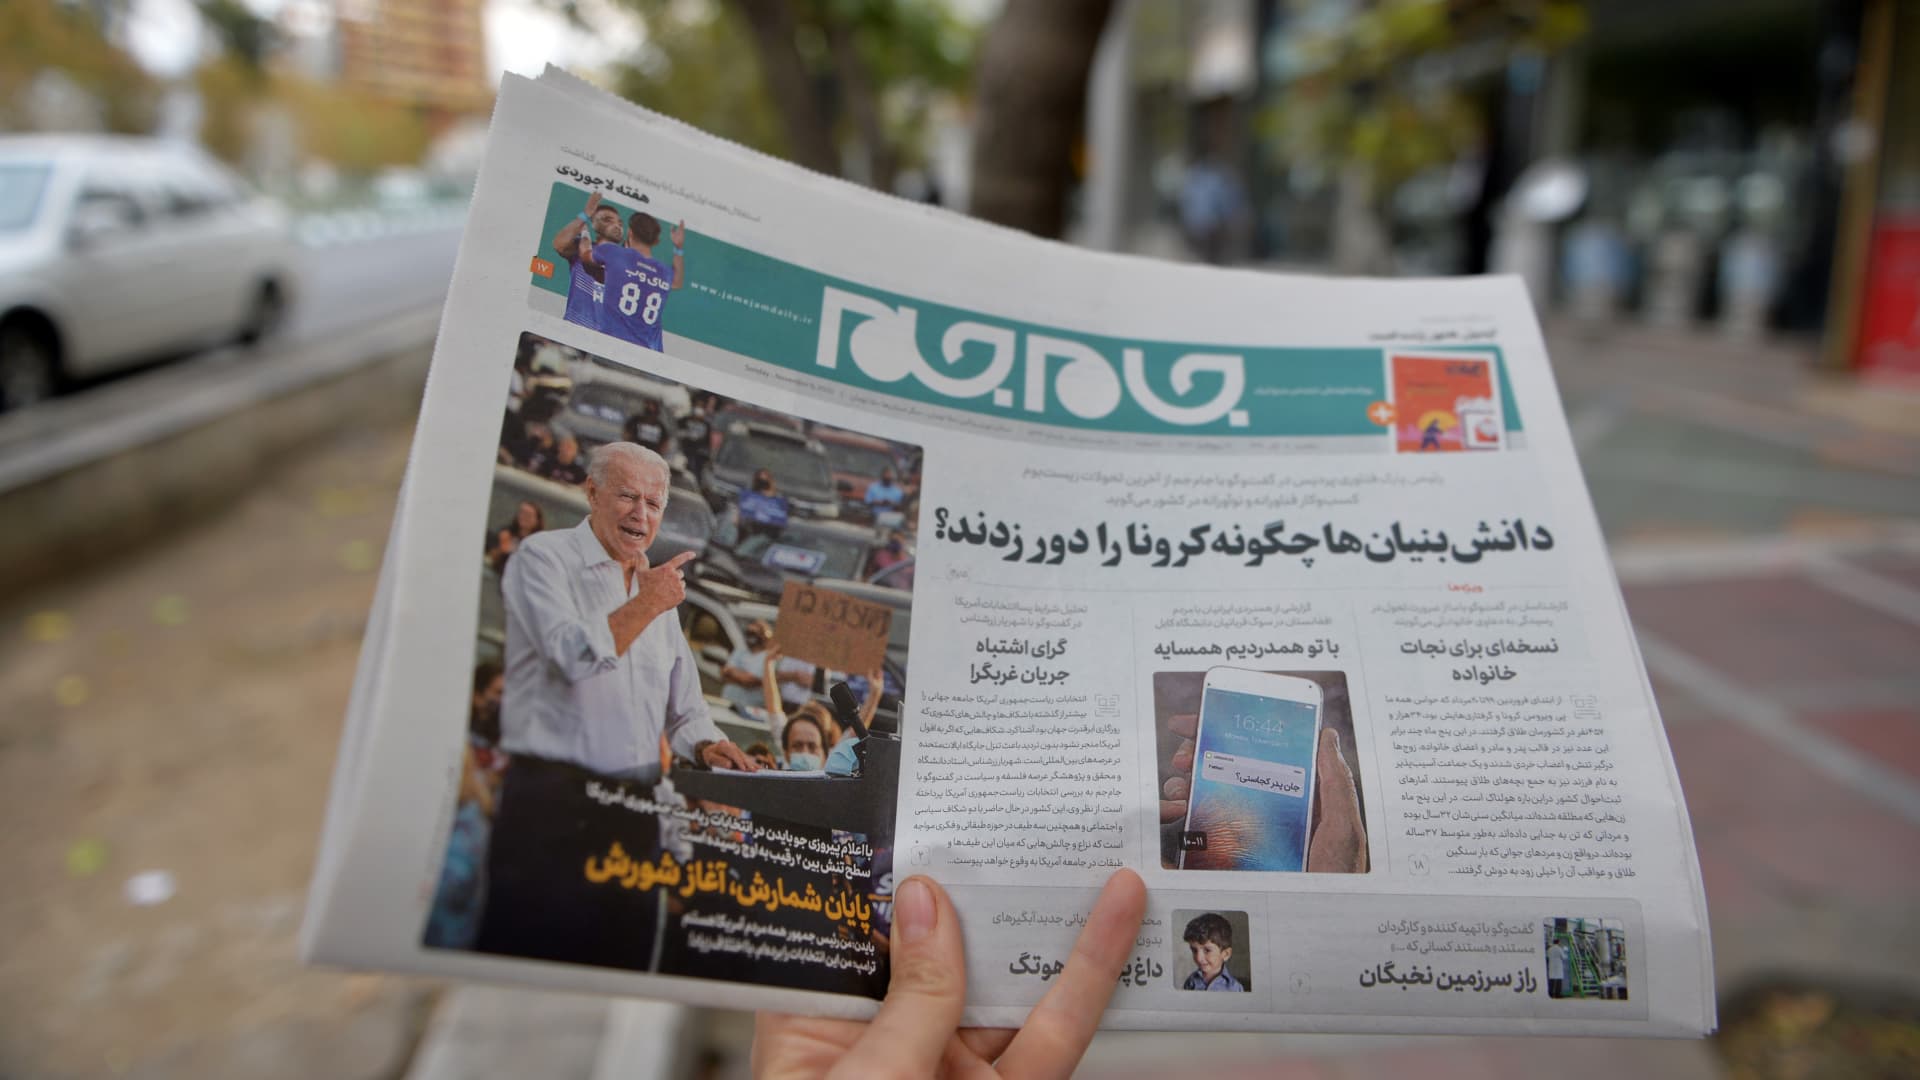 A view from Tehran's street as a citizen reading the news regarding the U.S. elections in newspapers, on November 09, 2020 in Tehran, Iran.